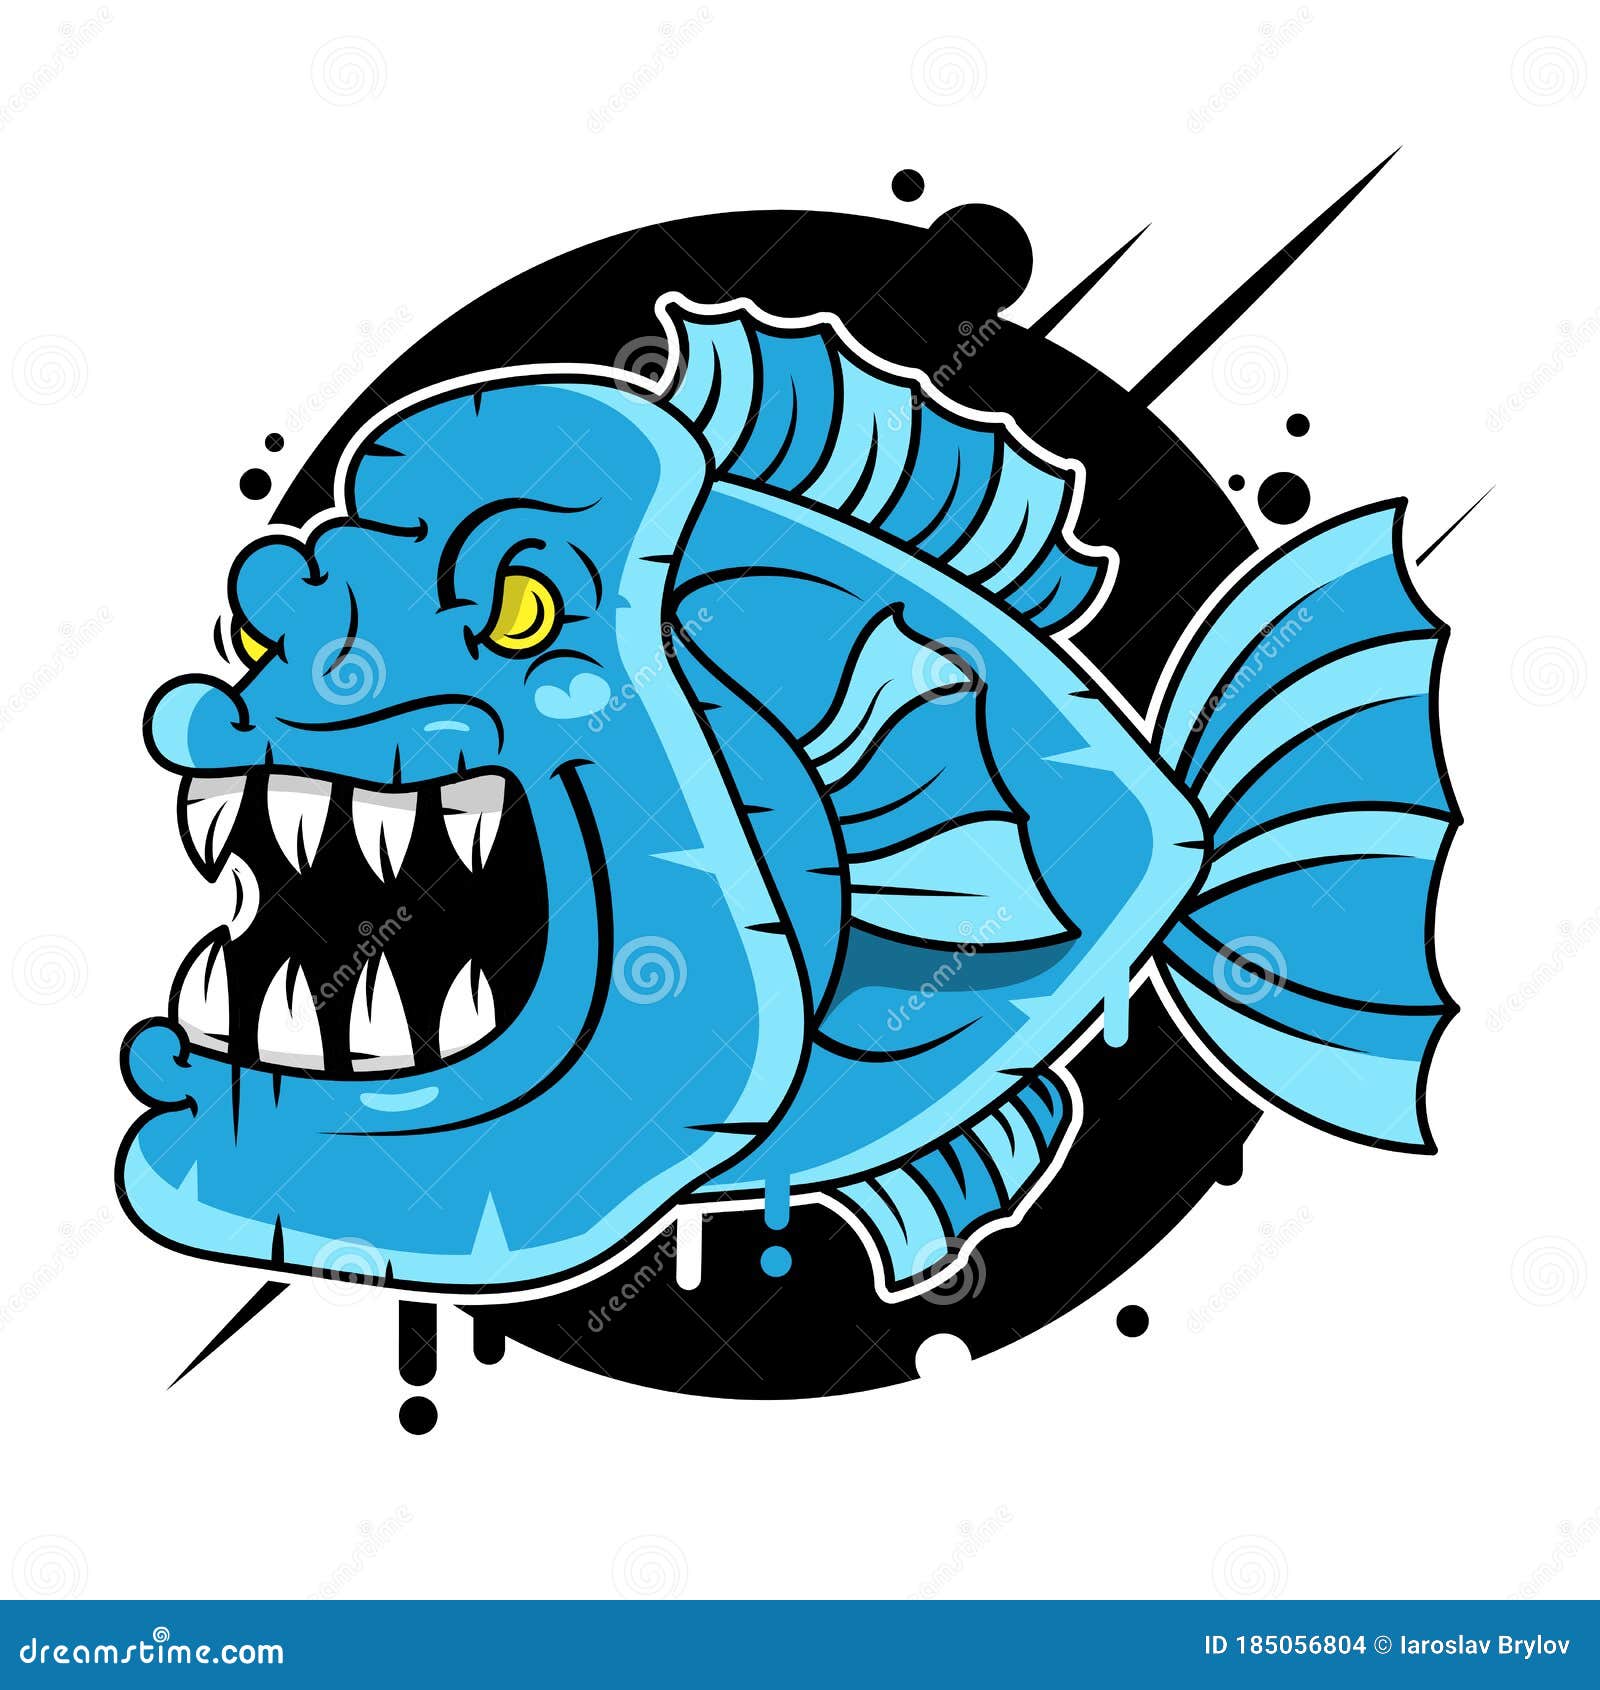 pirana fish character  suitable for greeting card, poster or t-shirt printing